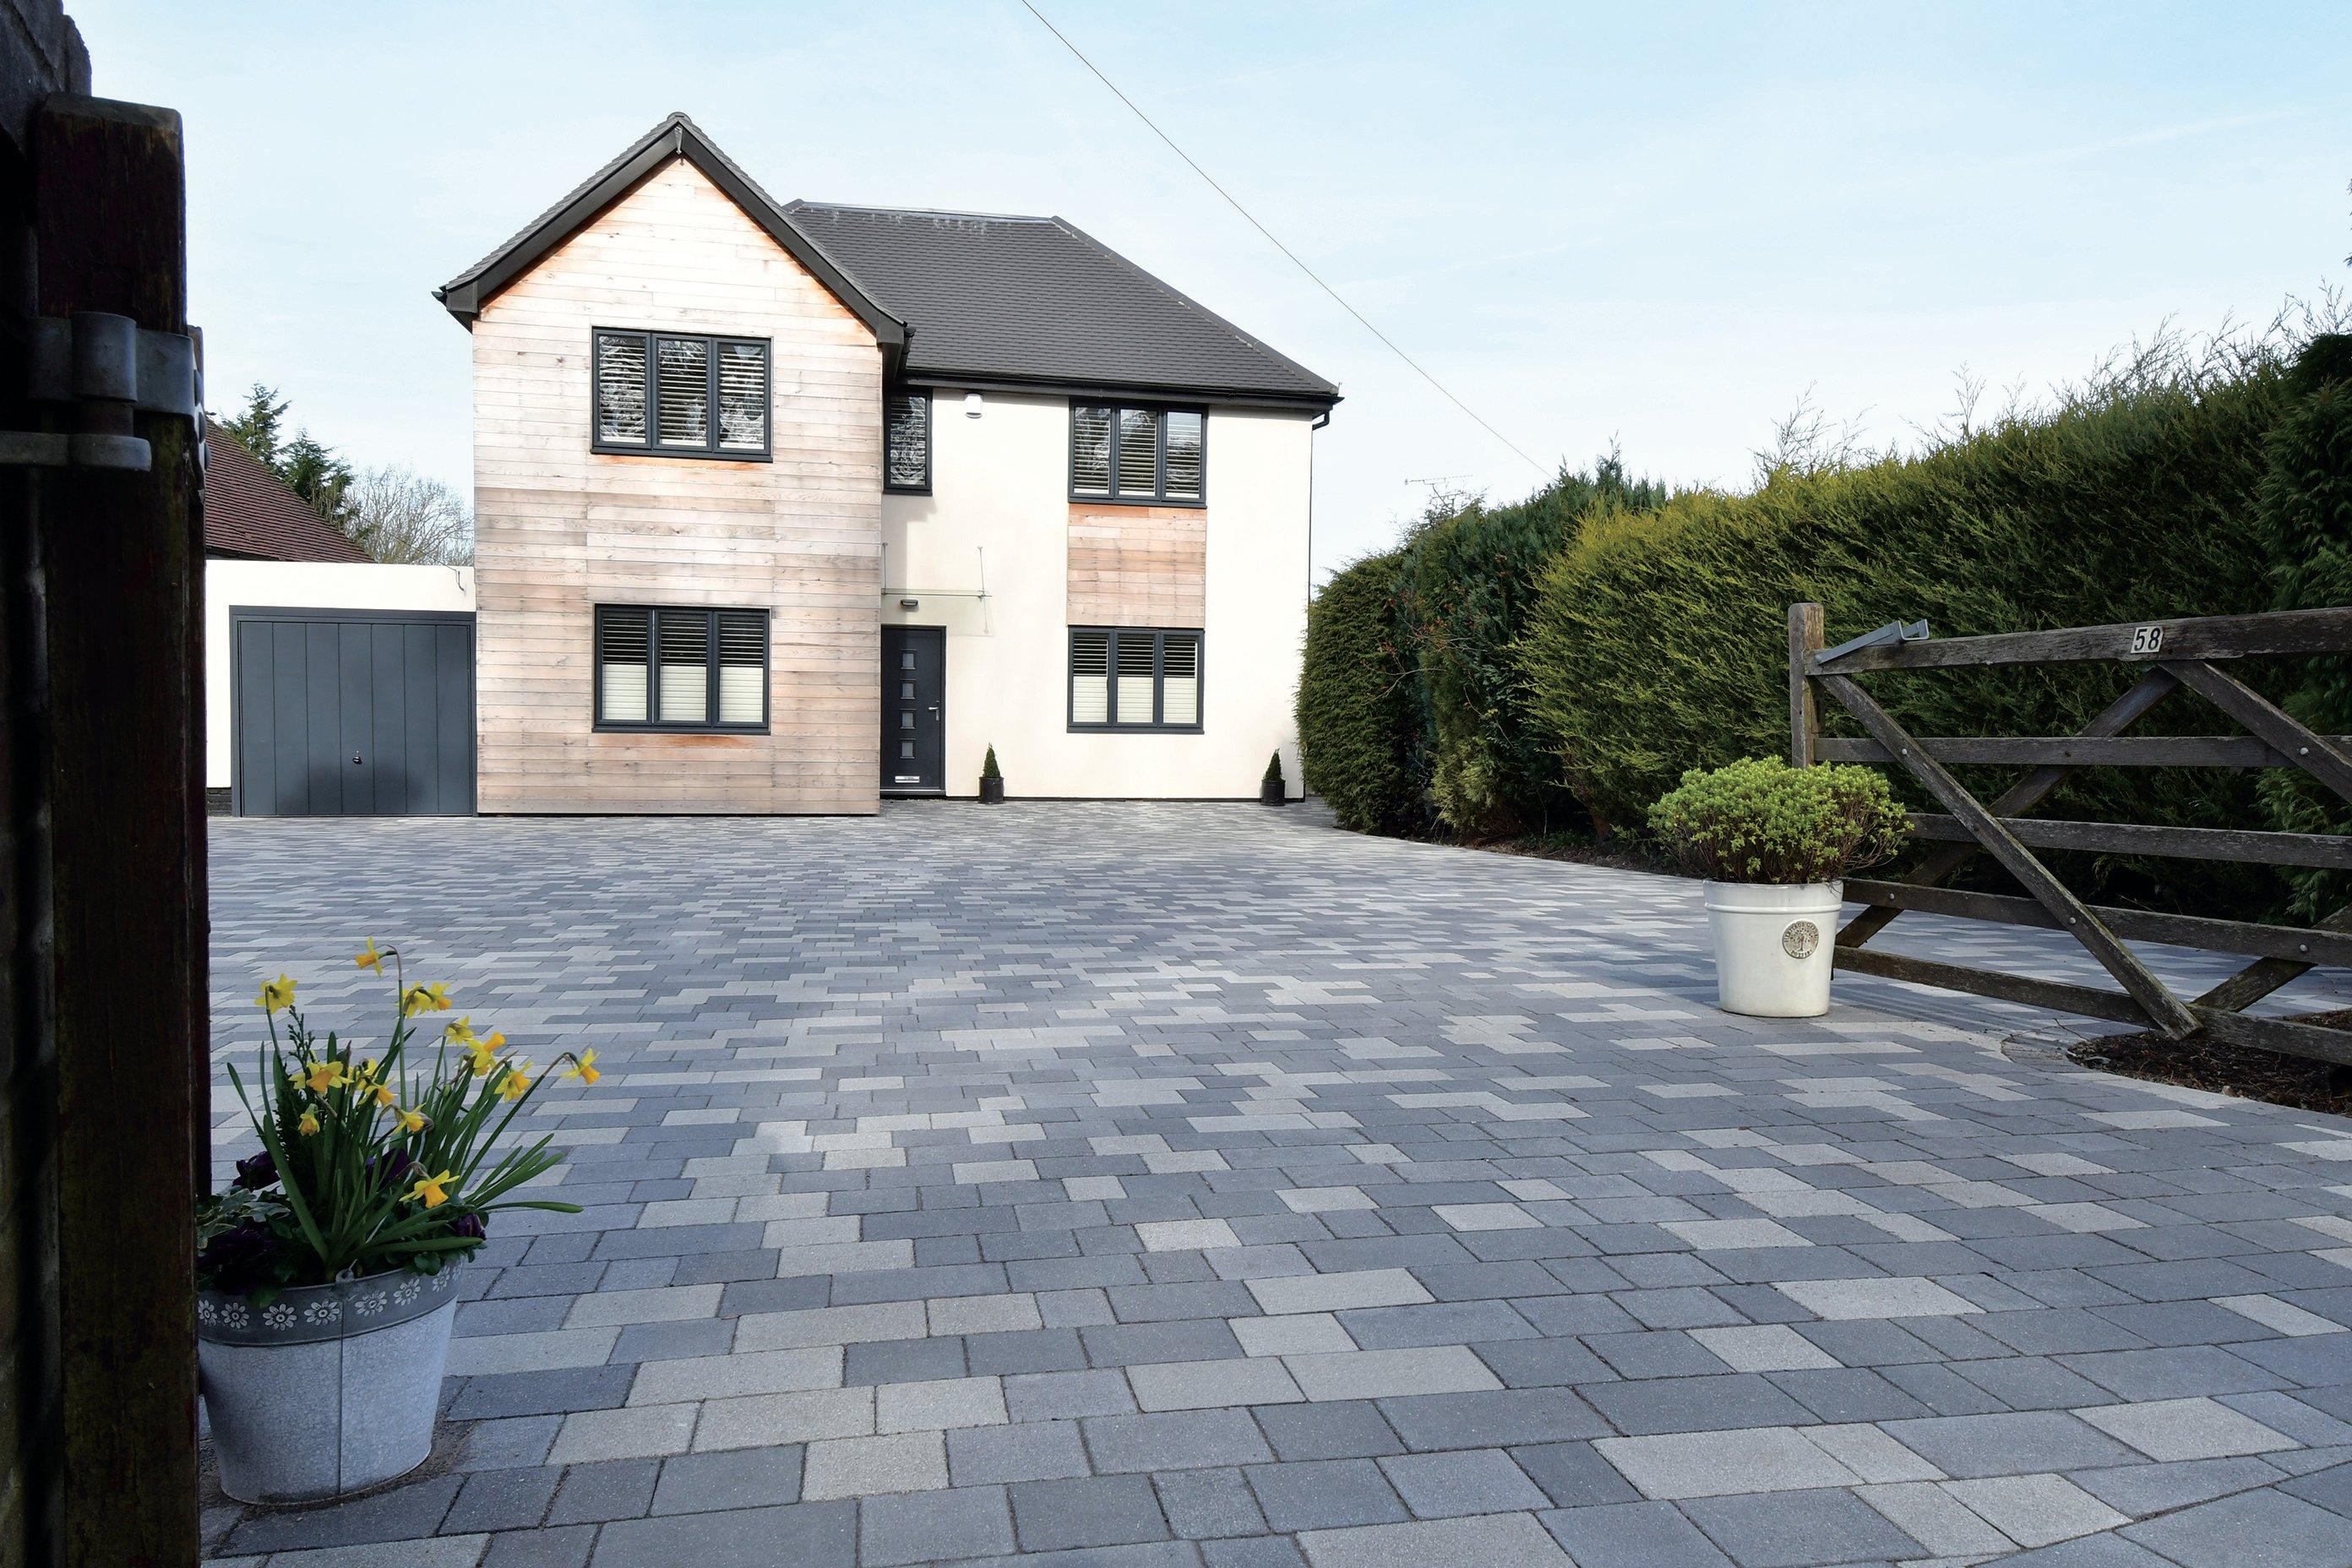 Responsible Suppliers: Paving the way for ethical and environmental landscaping